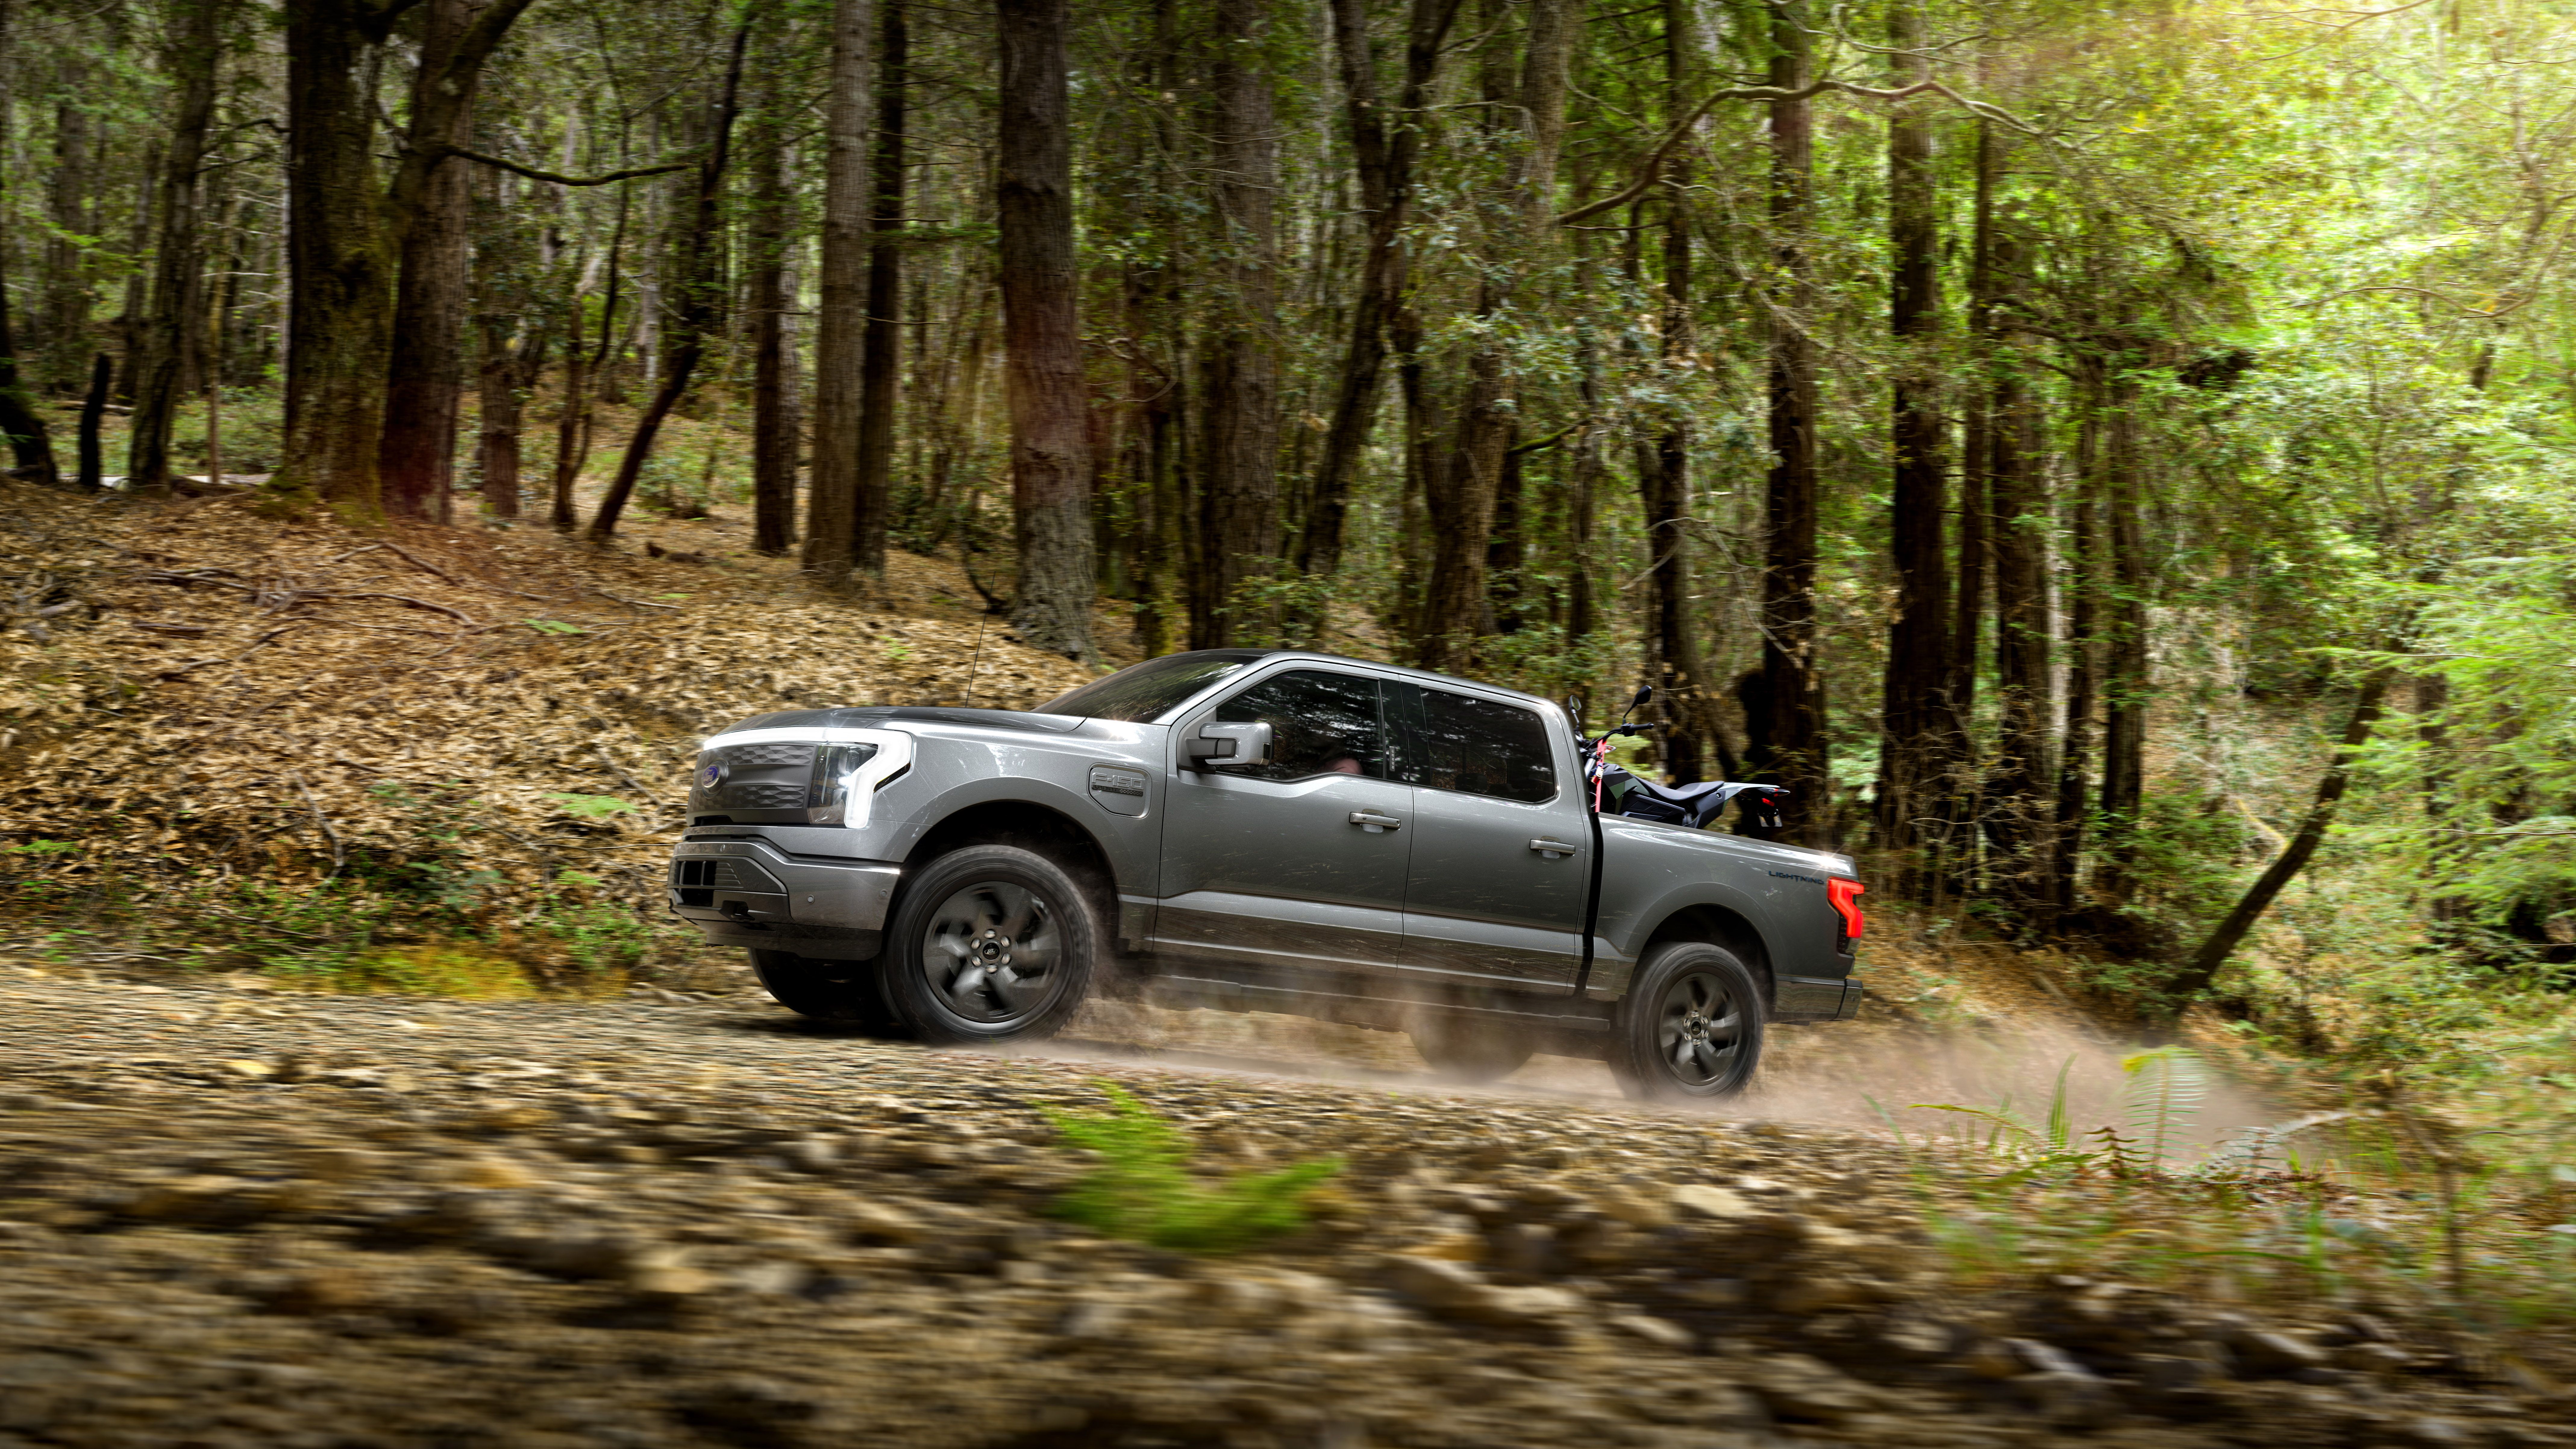 The 2022 Ford F-150 off-road, side profile view from distance